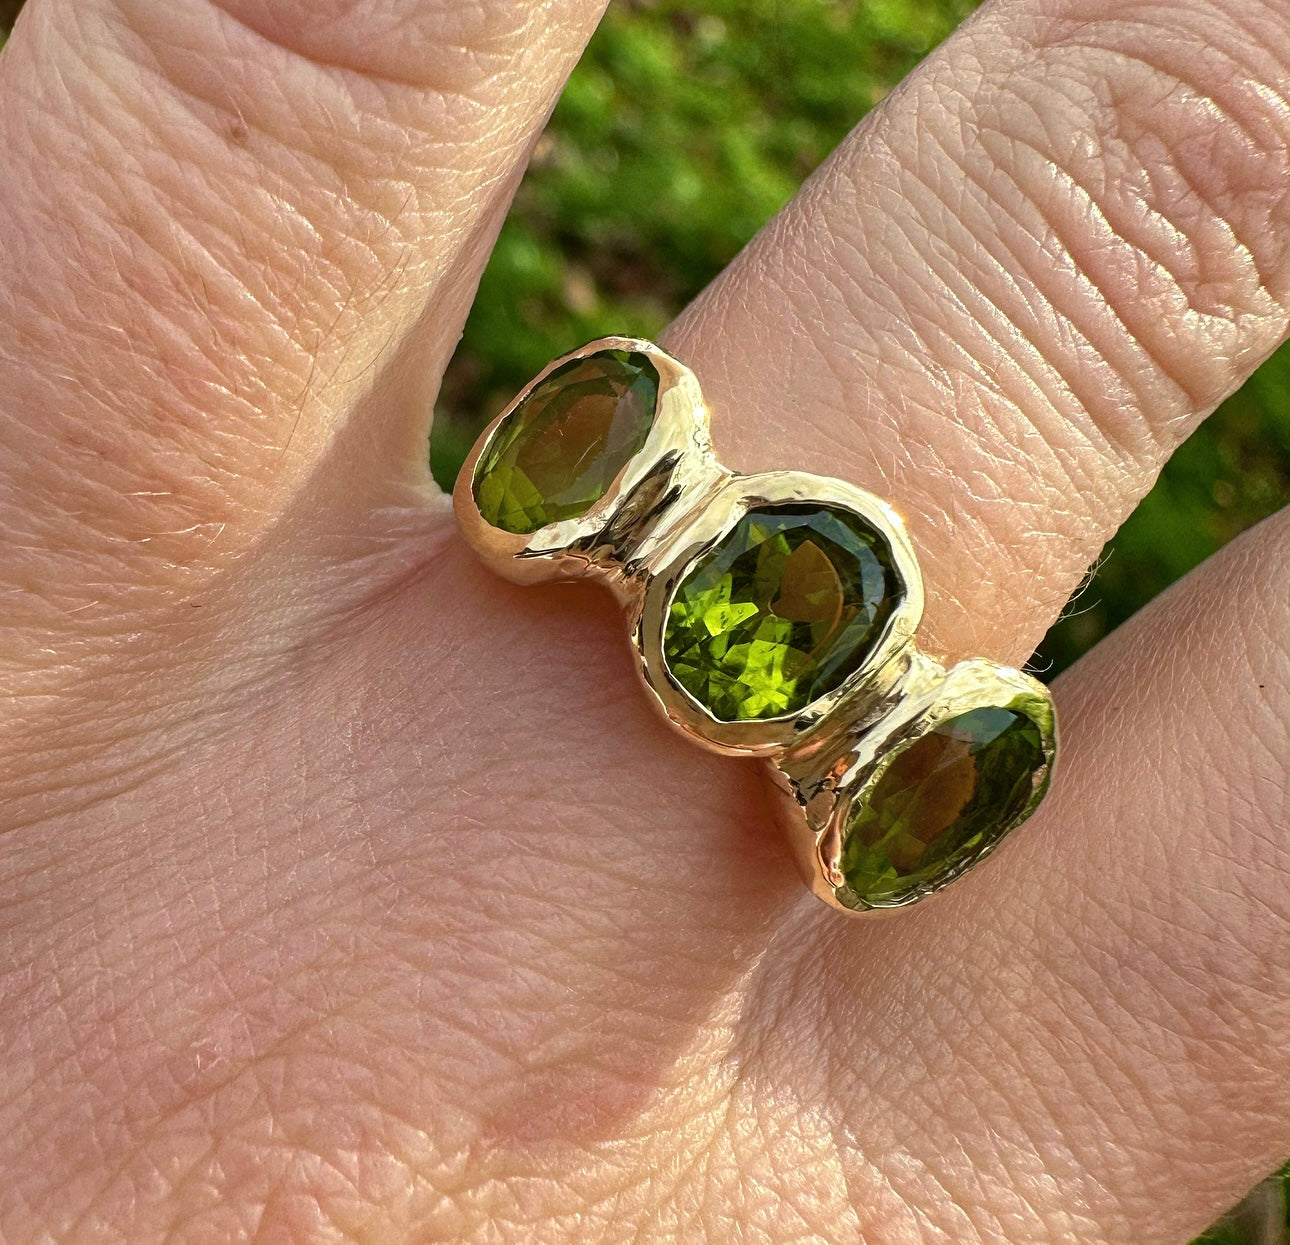 Buy Green Peridot Ring, 925 Solid Sterling Silver Ring, Peridot Stone Ring  , Green Cushion Quartz Gemstone, Copper Ring, Statement Ring Online in  India - Etsy